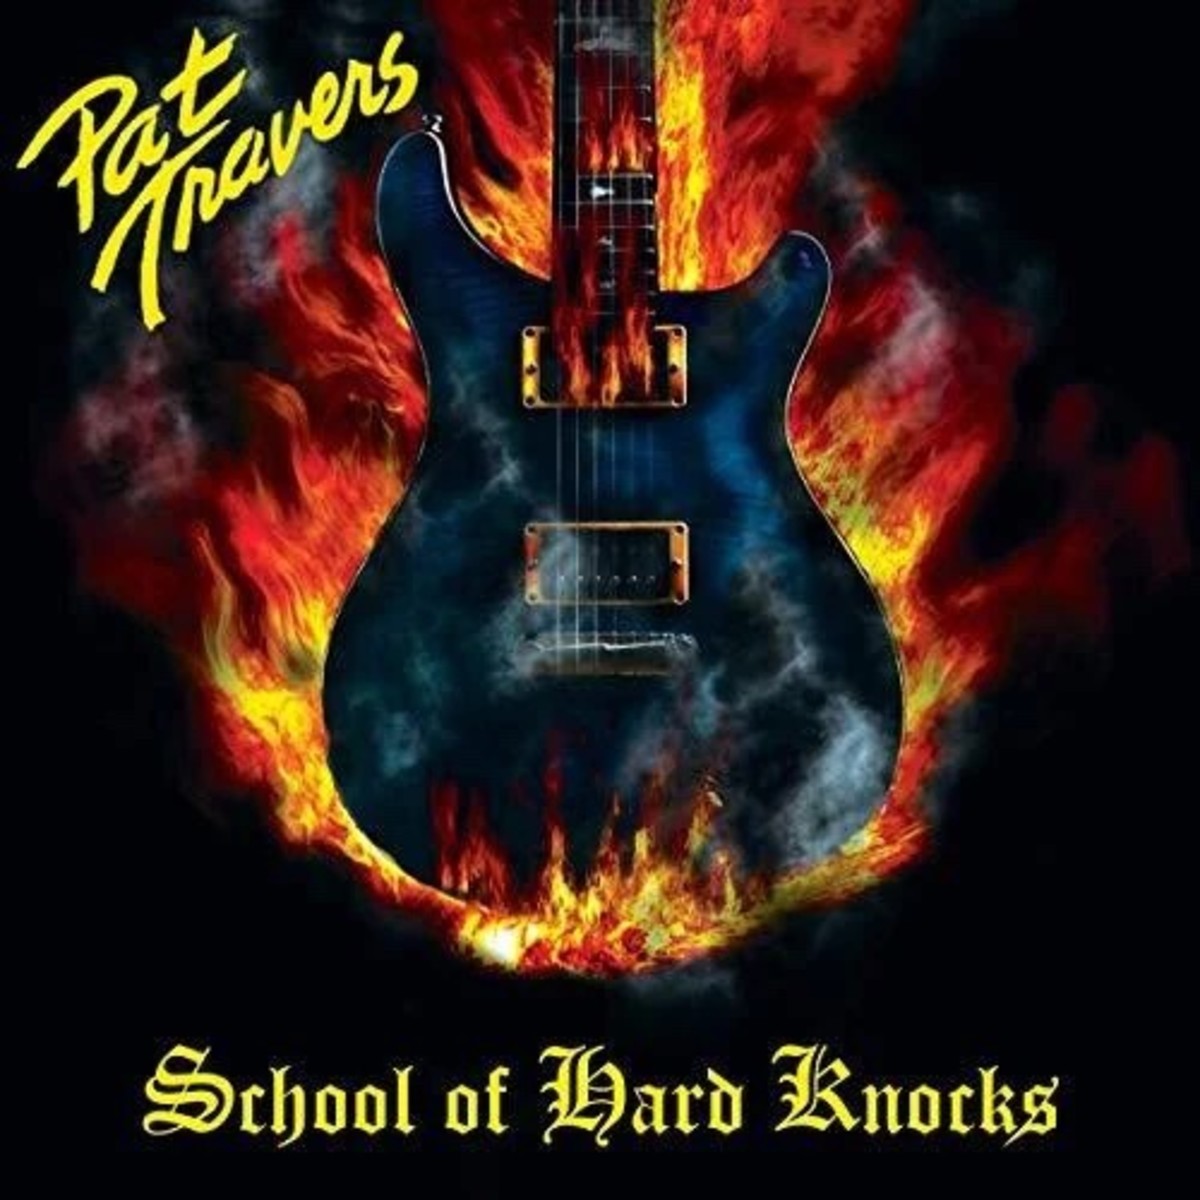 Pat Travers "School of Hard Knocks" is available on Yellow vinyl in the Goldmine shop by clicking above.